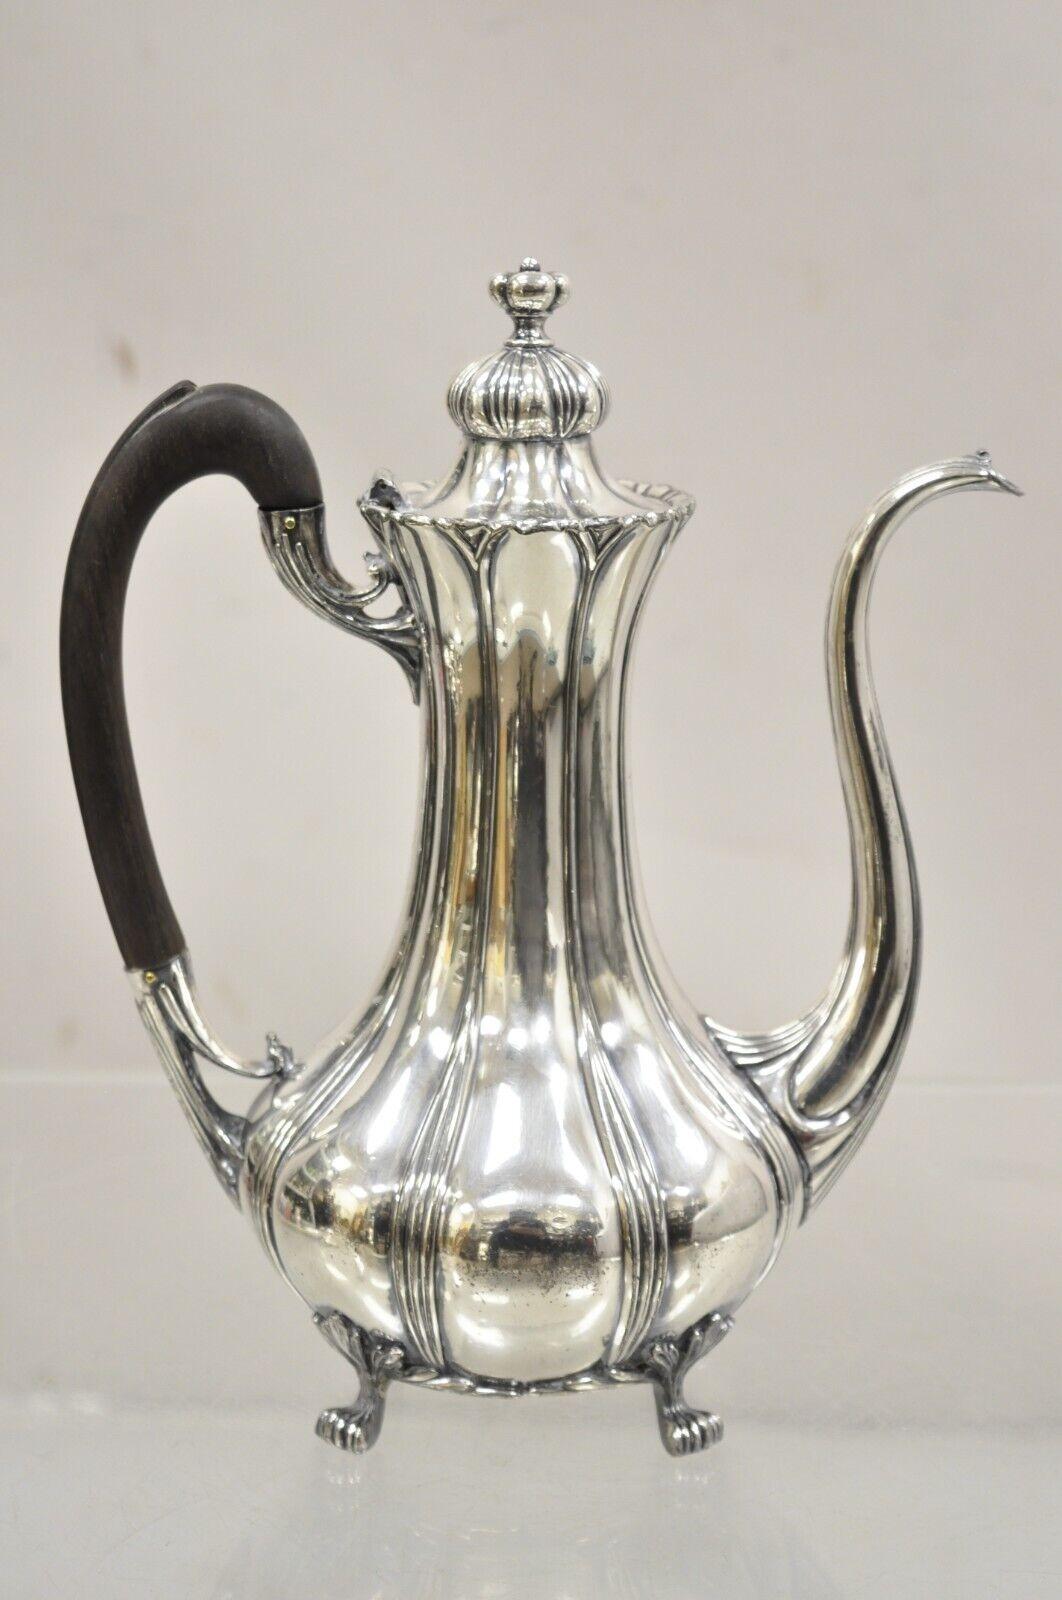 Antique Pairpoint Mfg. Victorian Silver Plated Tea Pot Coffee Pot. Item features a wooden handle, original hallmark, footed base. Circa Early 20th Century. Measurements: 10